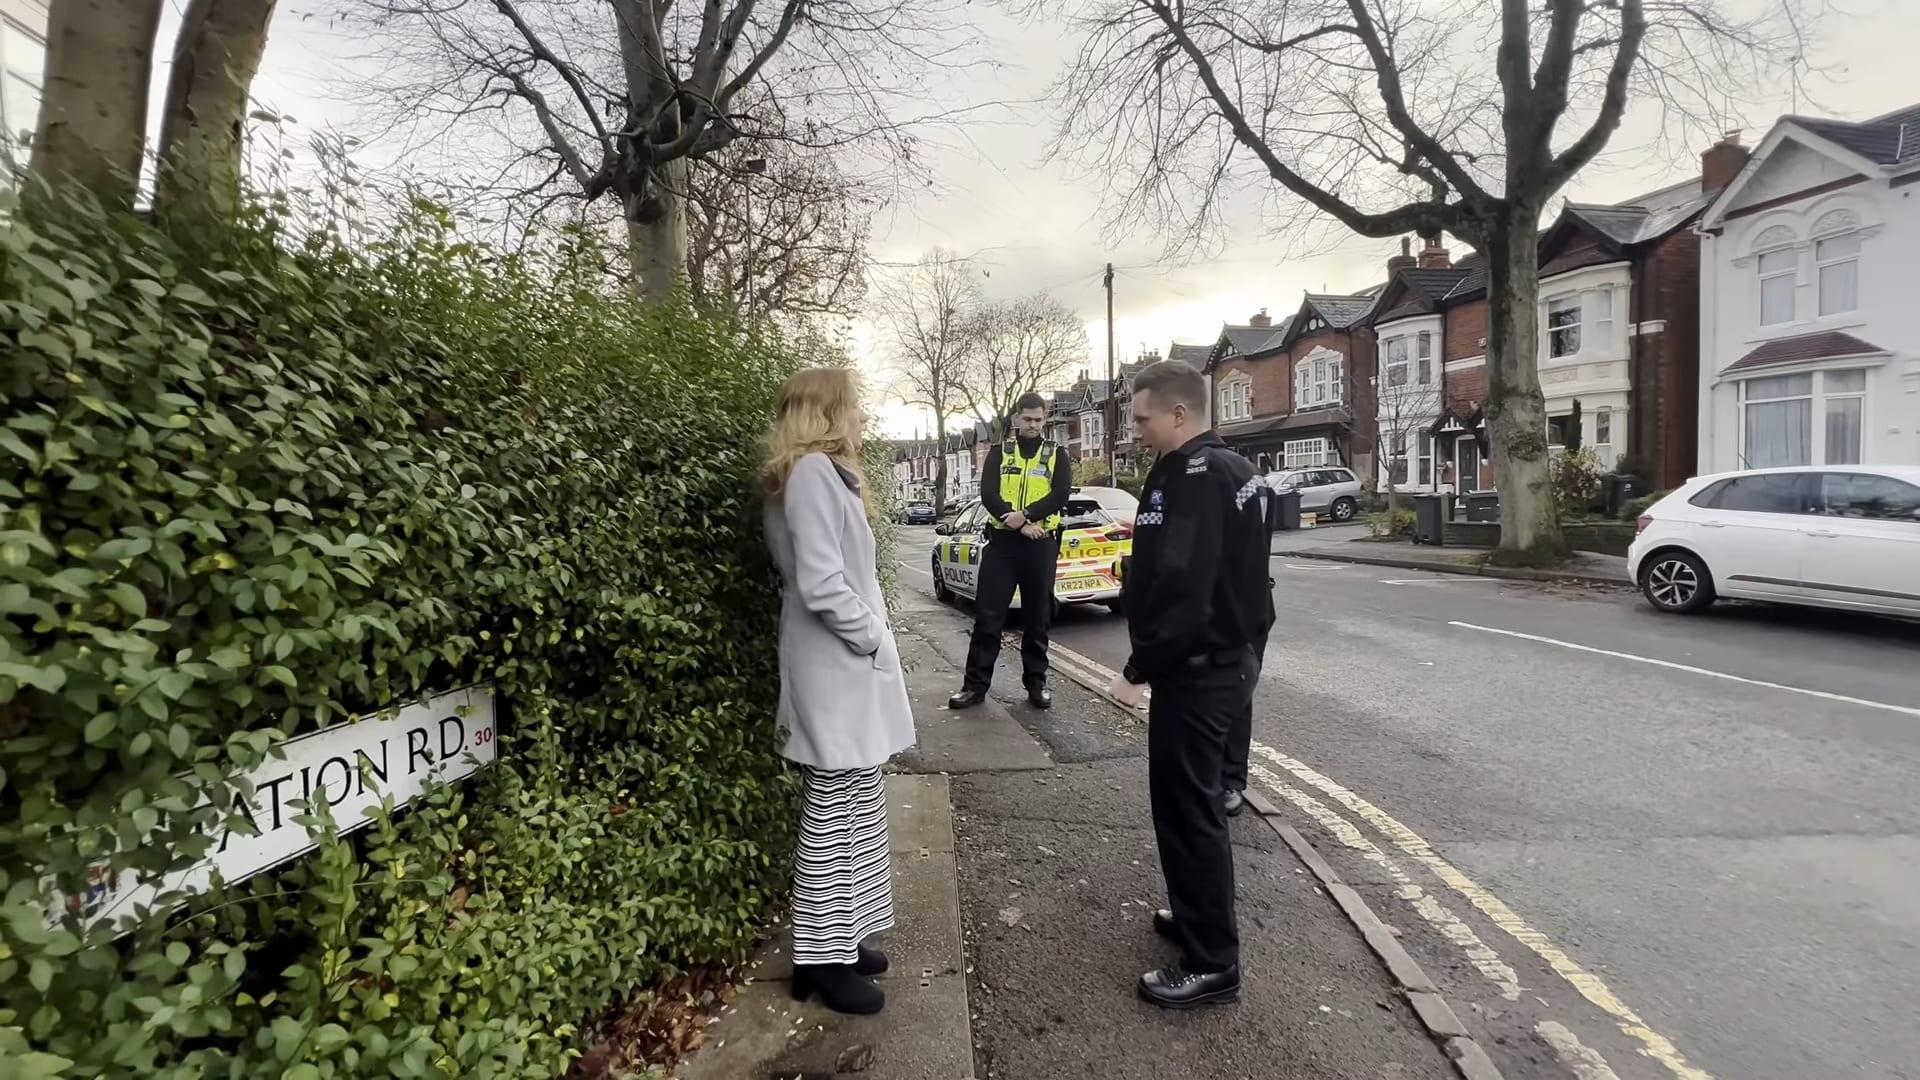 UK woman praying silently arrested for ‘thought crime’ amid crackdown on speech